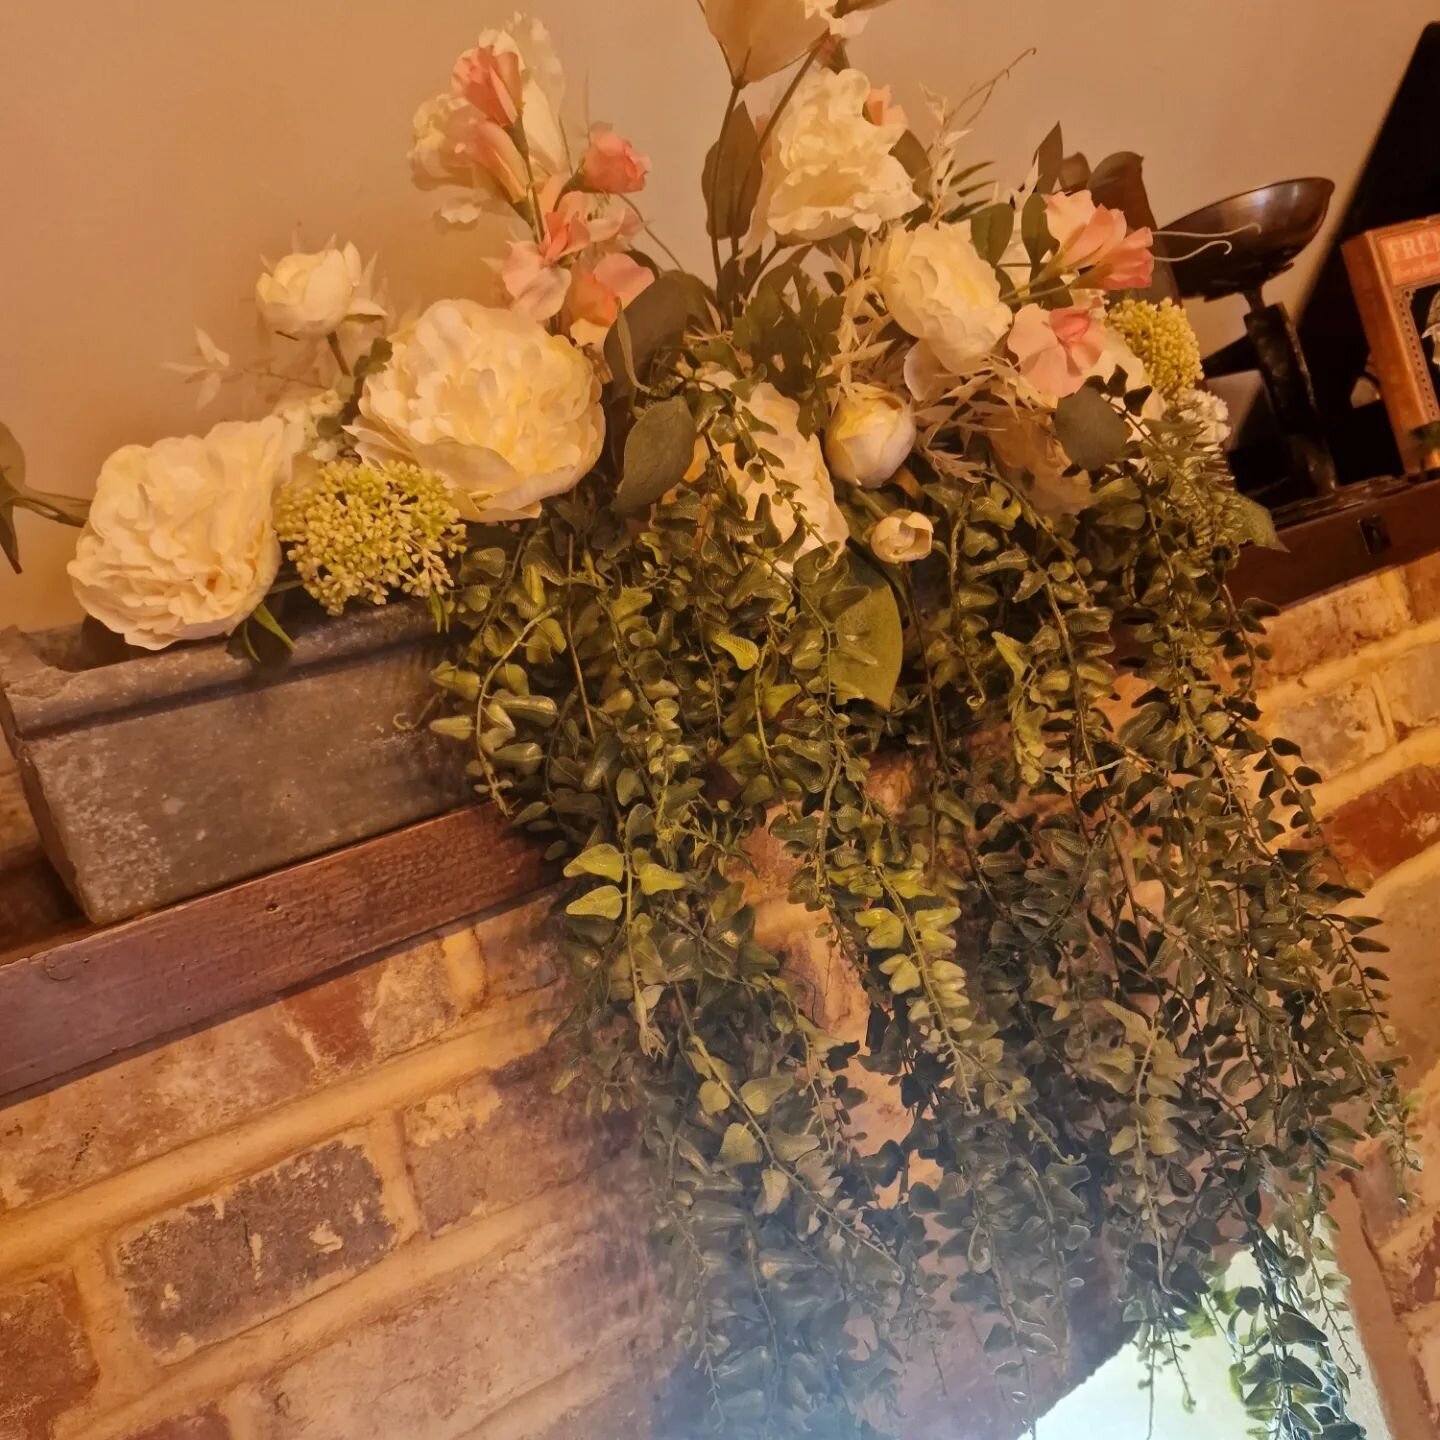 Decoration is well underway in 'The Nest' all thanks to @twistedtwigflorist

So here's a little sneak peak!

It's going to take a few weeks, but its going to be stunning when it's finished. 

Perfect area for you to host your baby showers, afternoon 